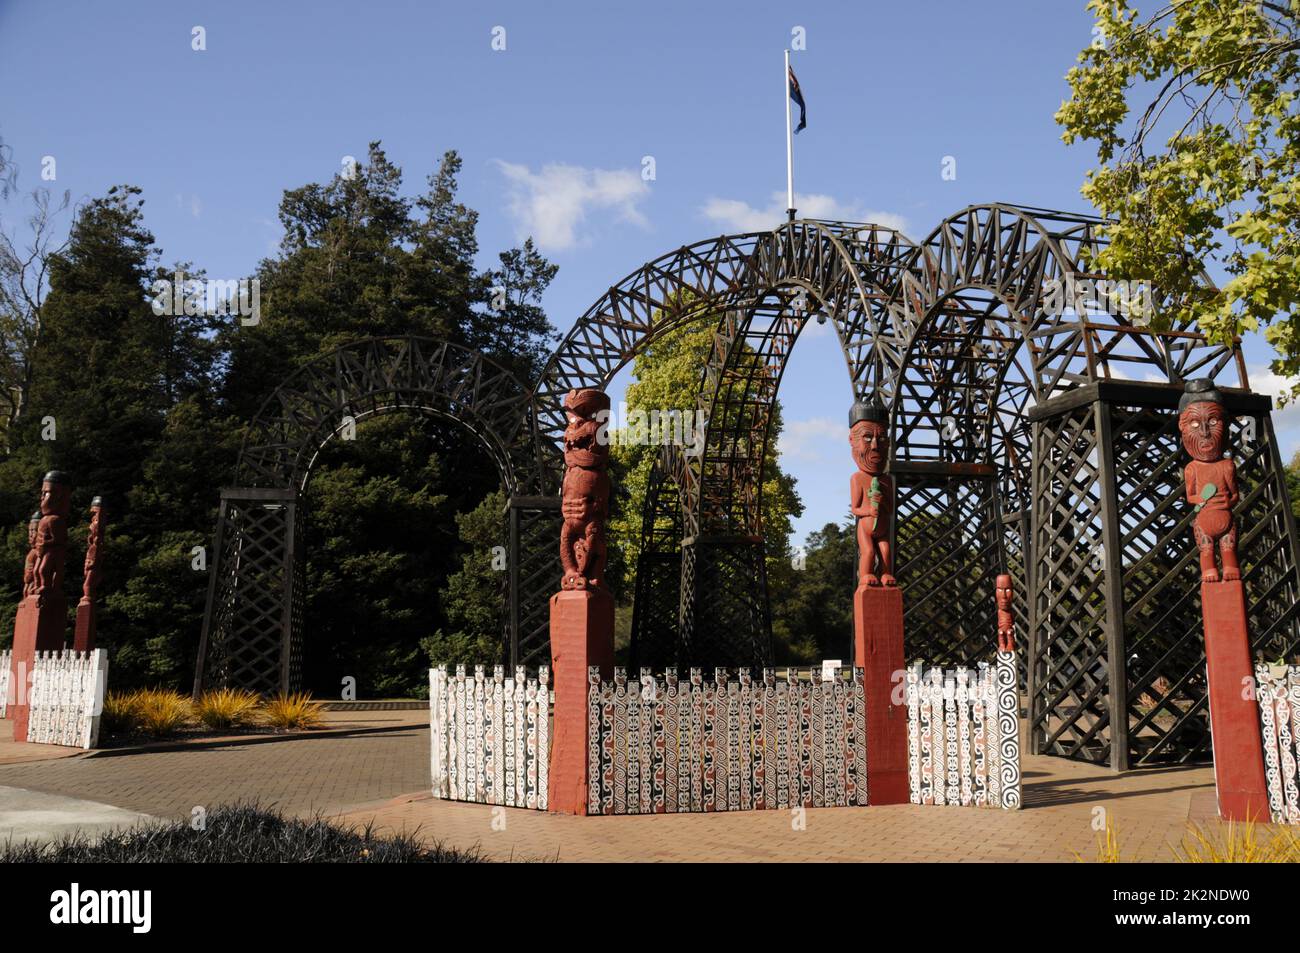 PrinceÕs Gate Archway leading into QueenÕs Drive to the Government Gardens in Rotorua, a town on the shore of lake Rotorua on New Zealand's North Isla Stock Photo